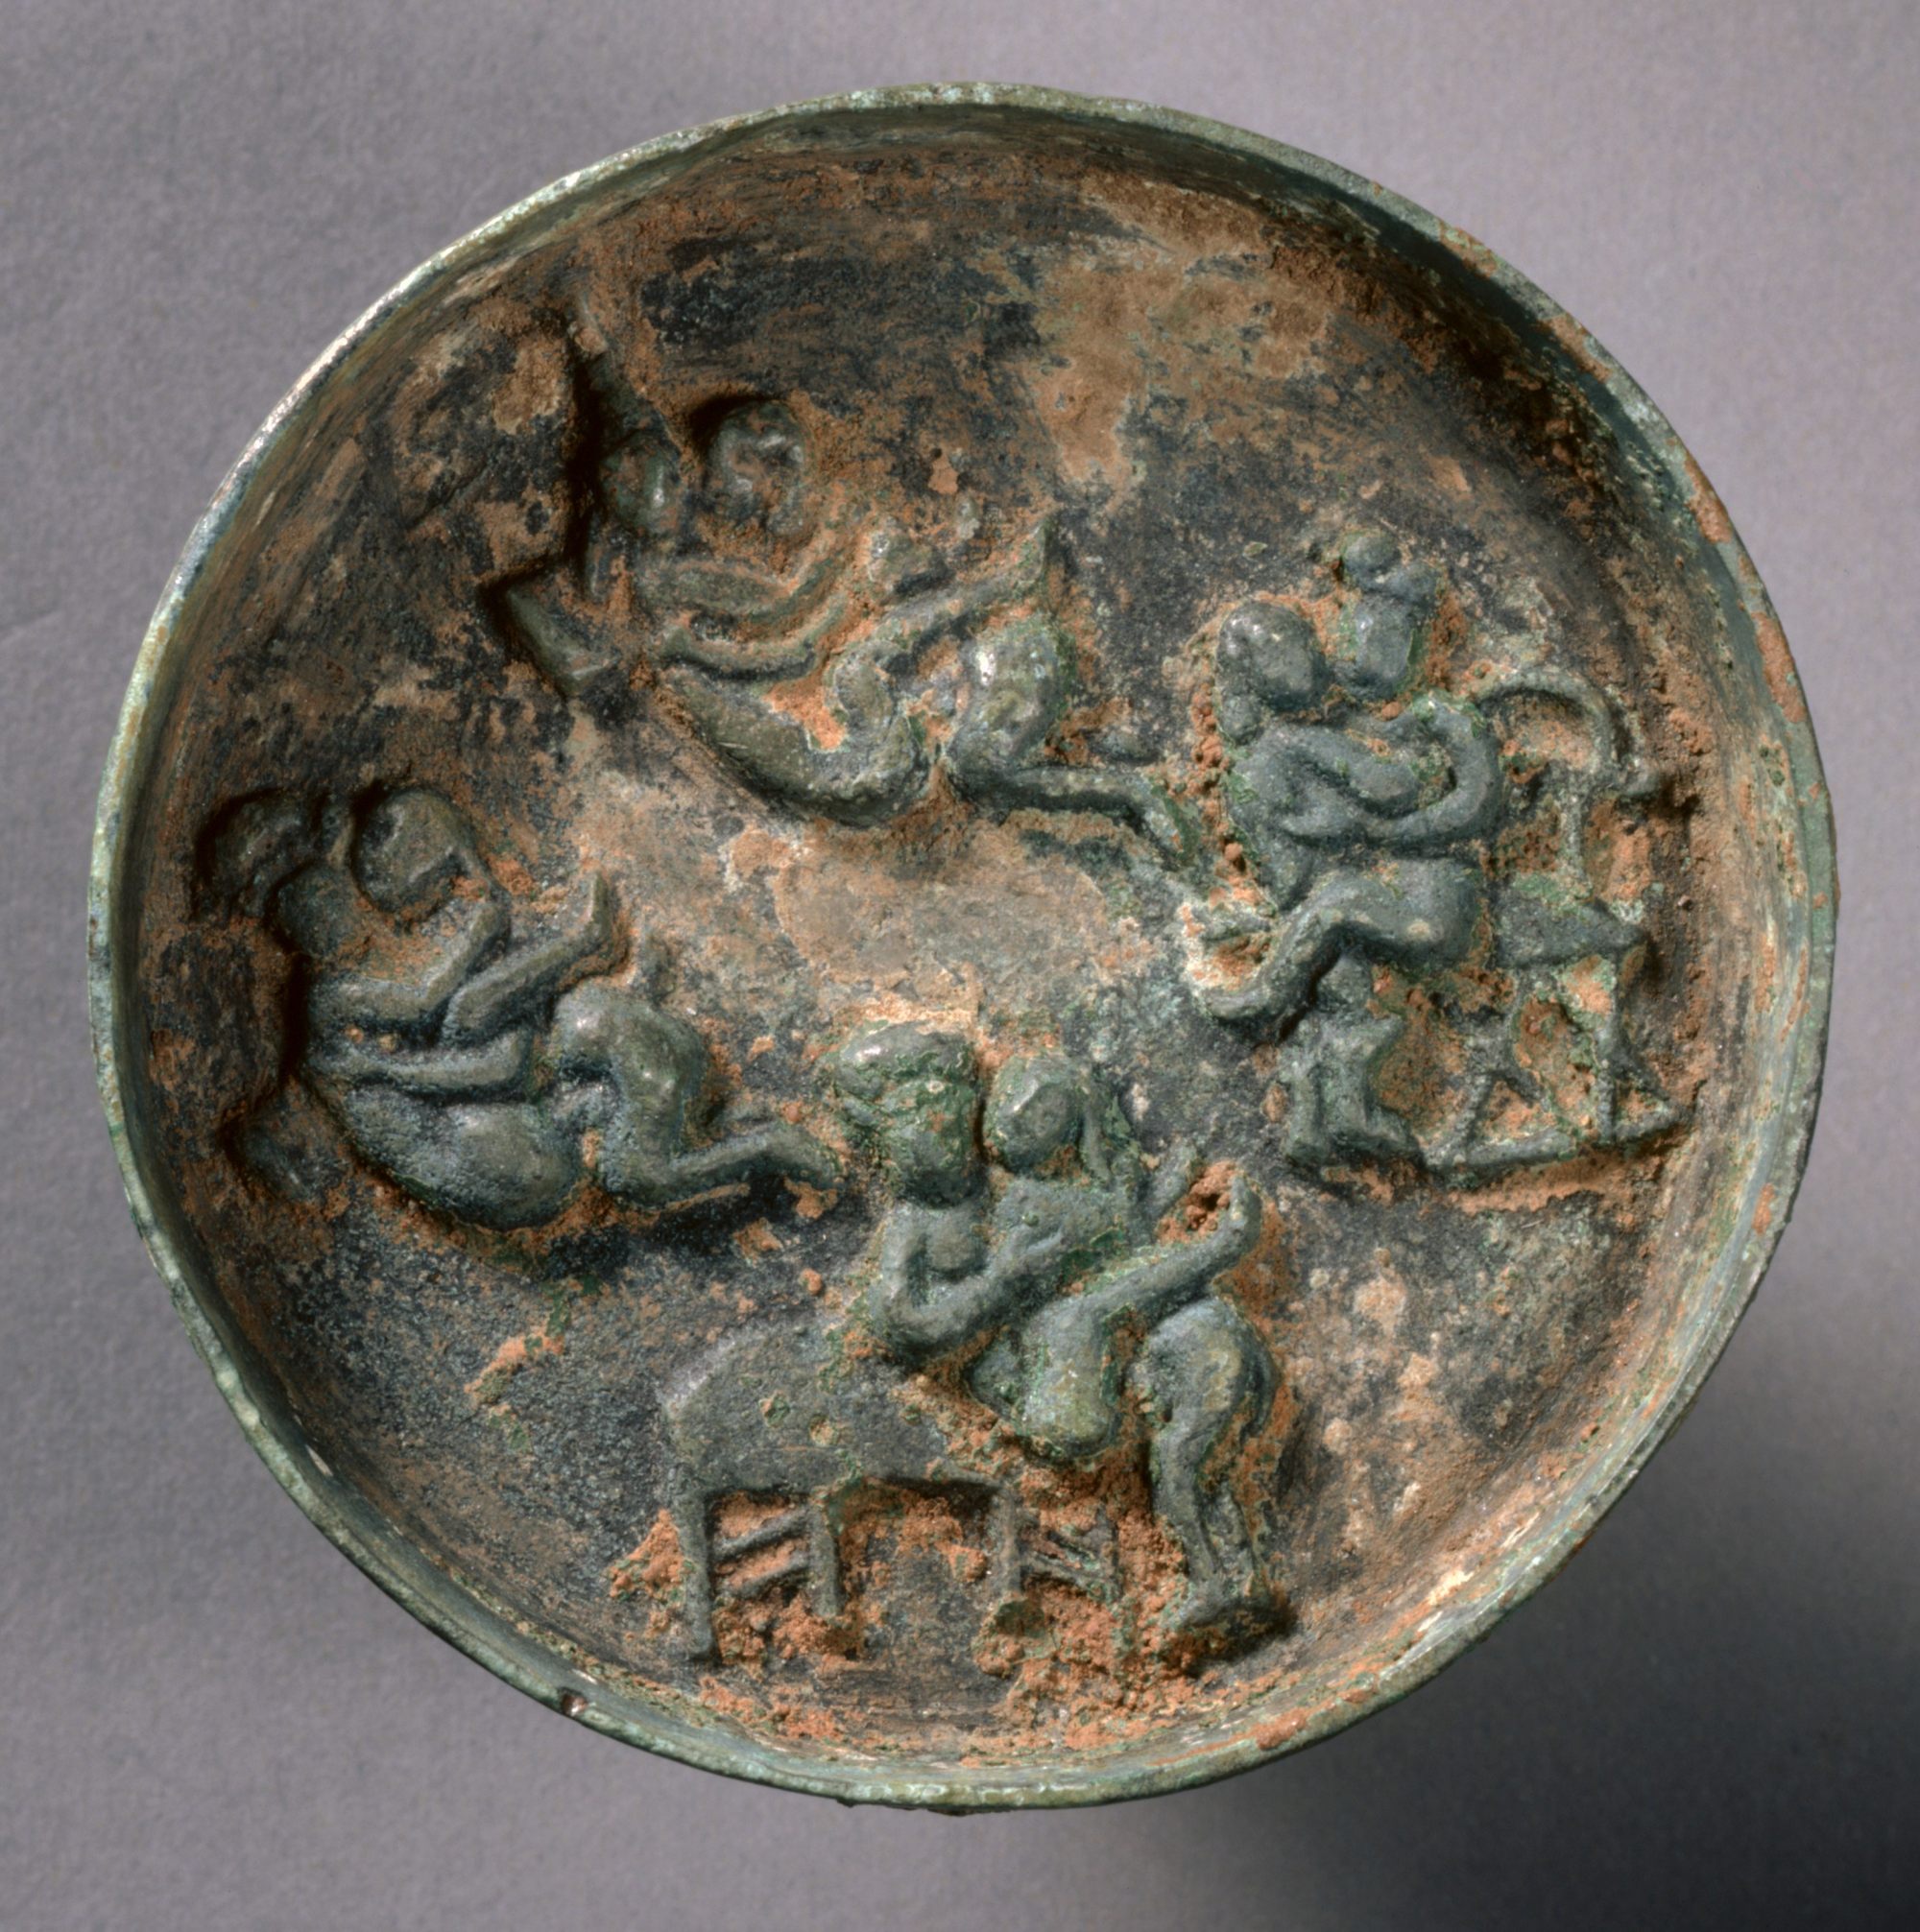 A bronze Chinese artefact from the late 13th century to mid-14th century showing various sex positions. Photo: Getty Images